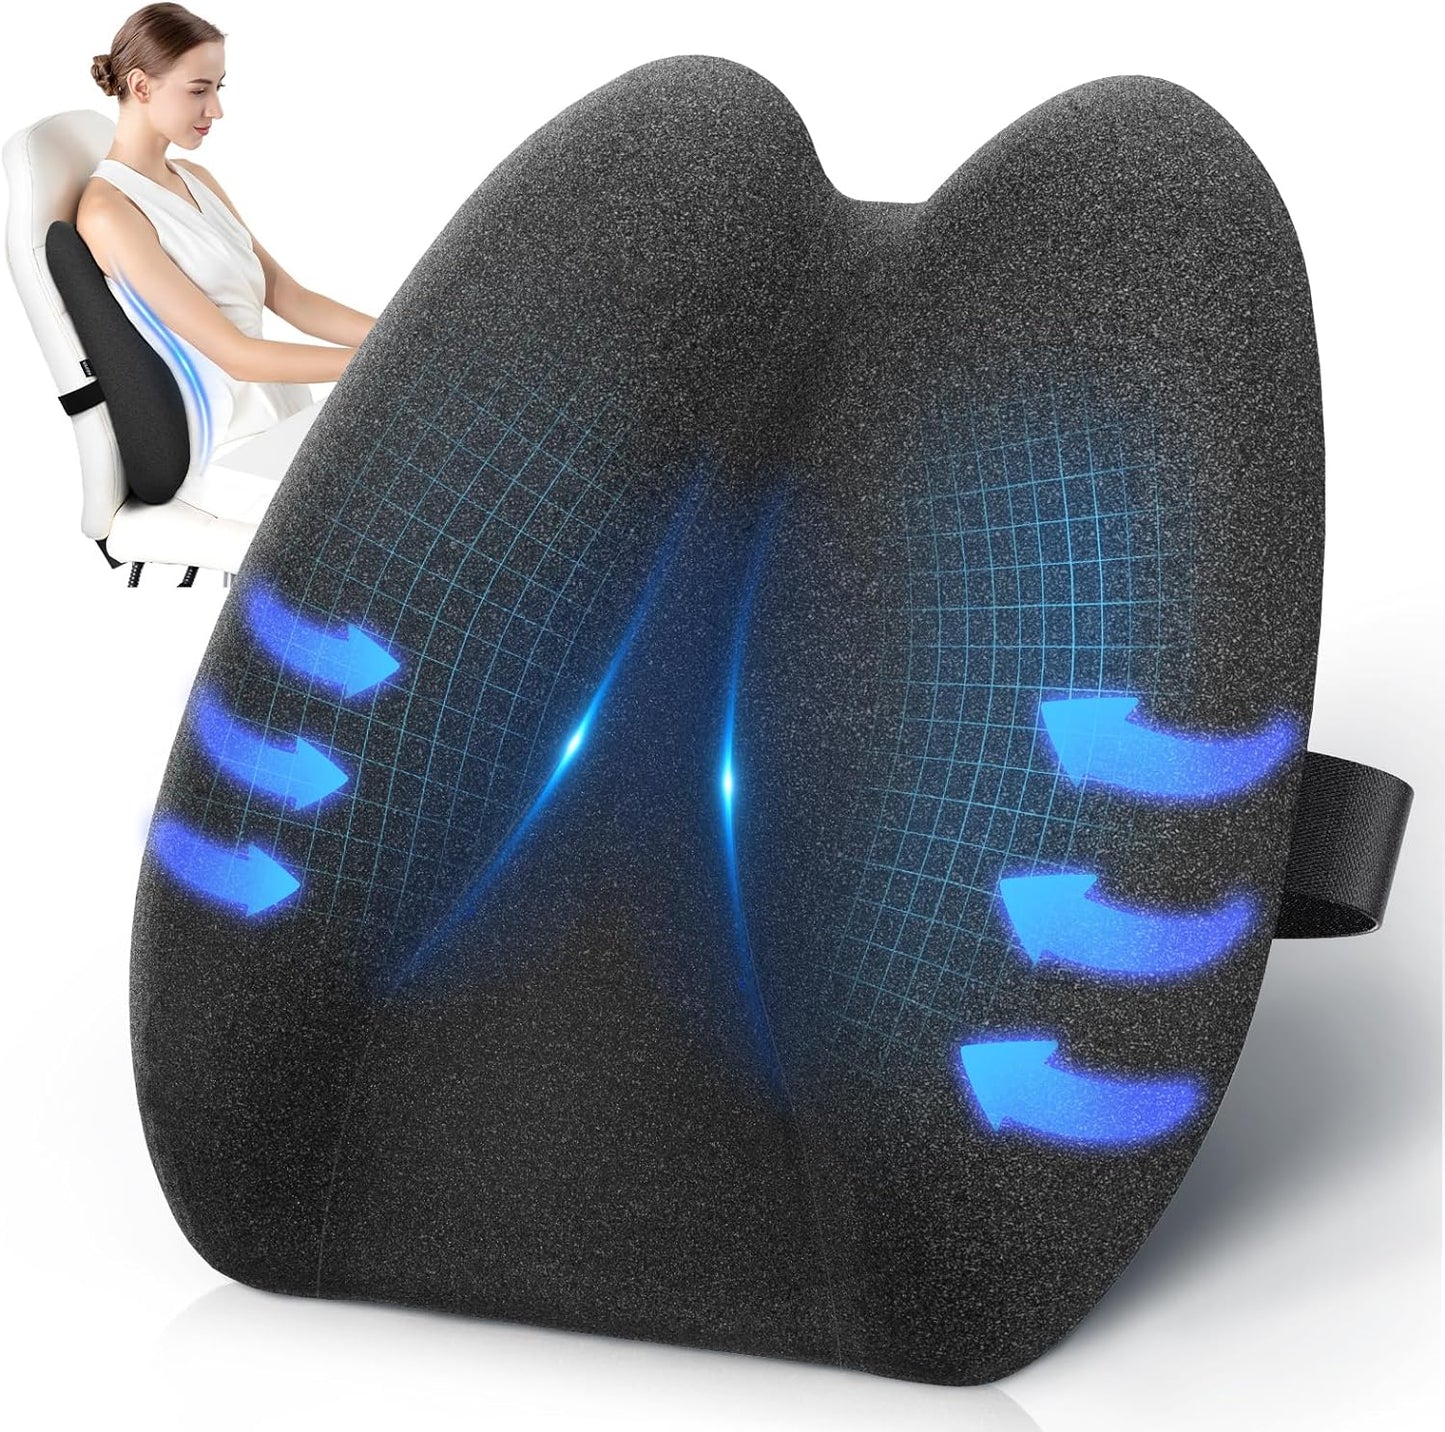 New Pain Relief Lumbar Support Pillow for Office Chair, Ergonomic Lumbar Pillow for 5X Back Support and Improved Posture Effectively, Cooling Memory Foam Back Cushion